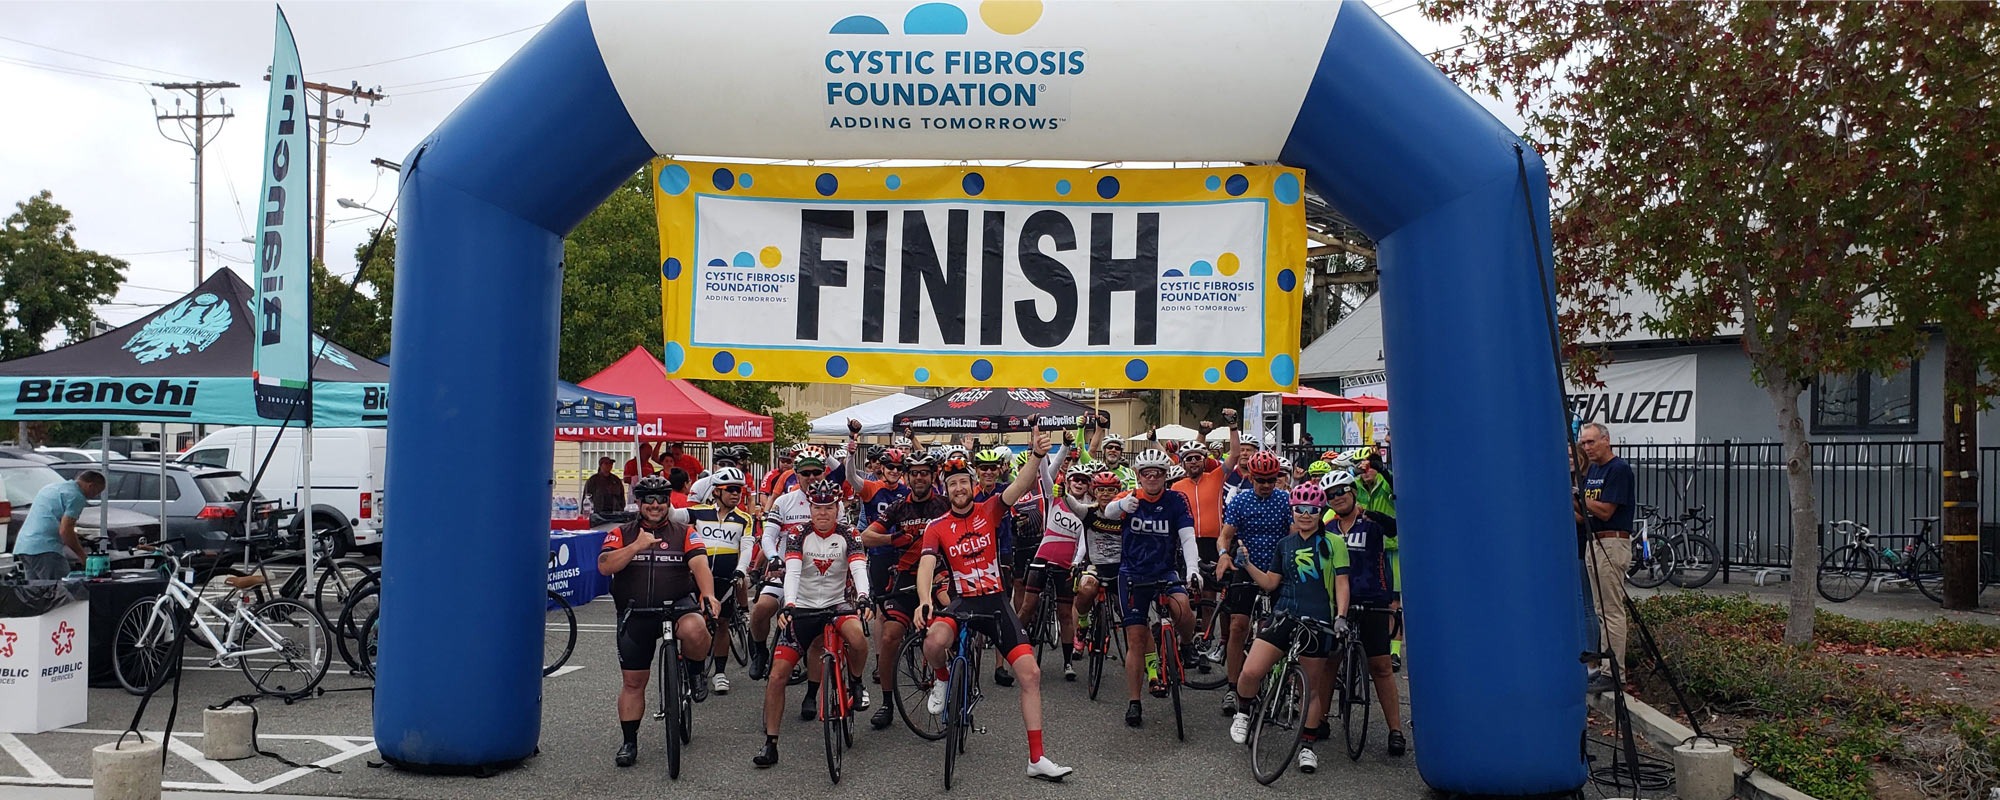 cyclists at the cycle for life starting finish line